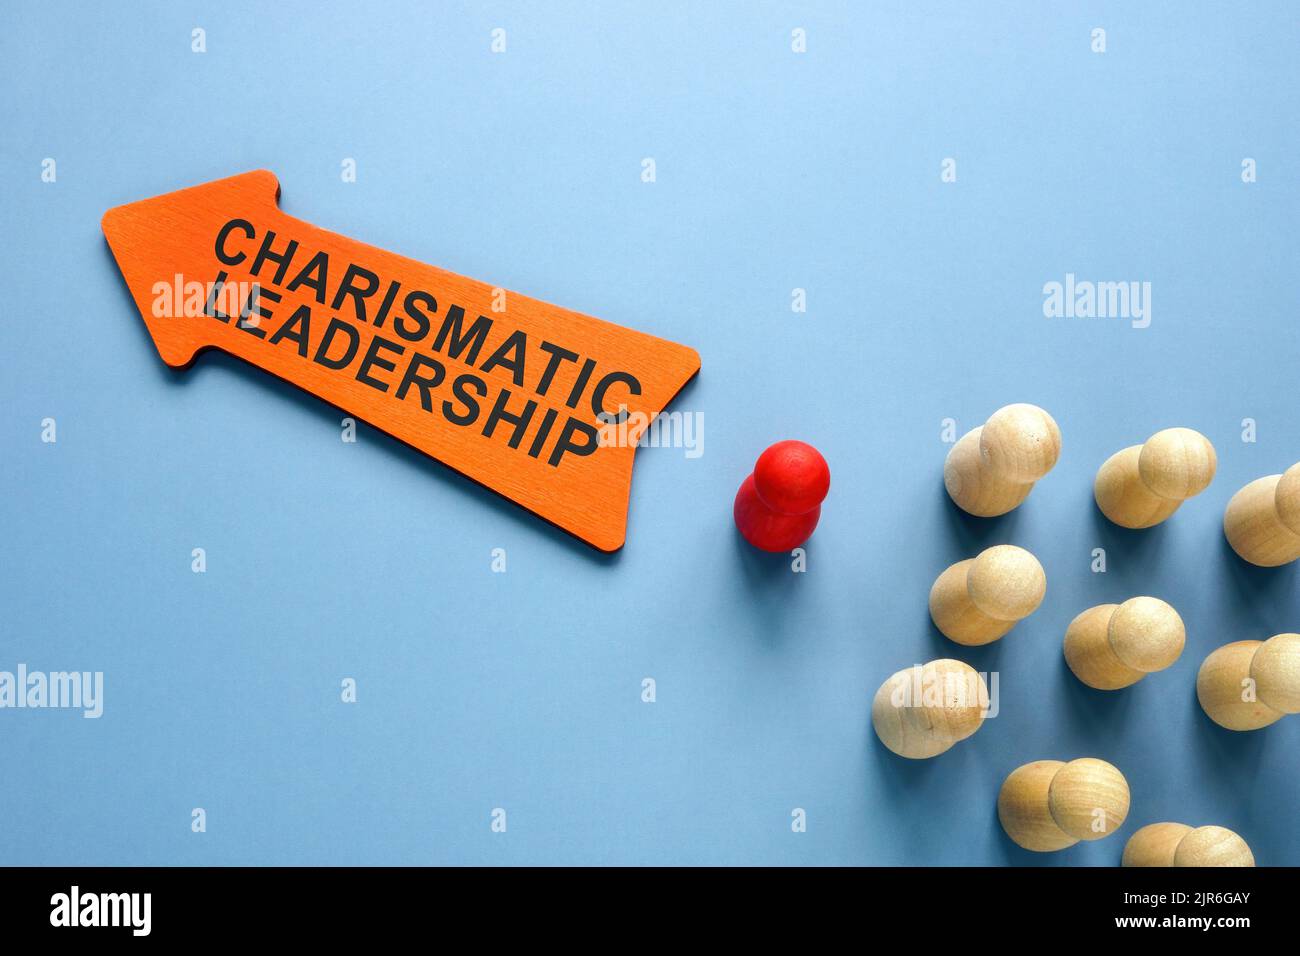 Arrow with words Charismatic leadership and figurines. Stock Photo